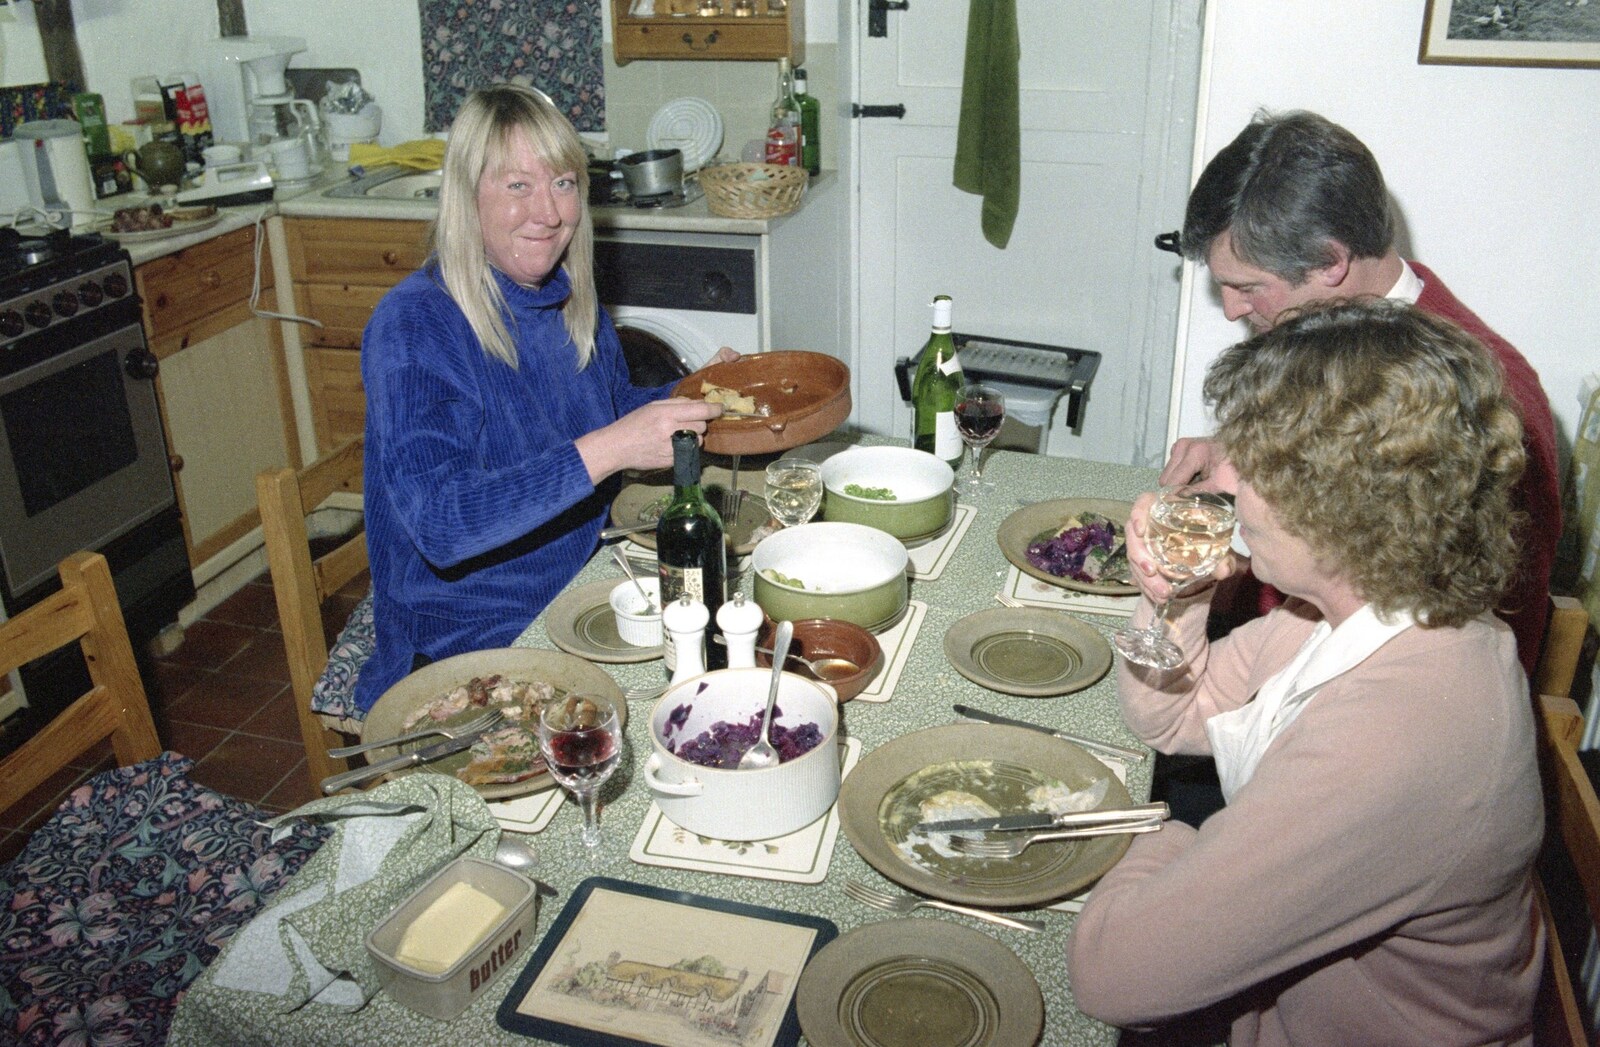 Sue gets some more potatoes from Lunch and Dinner at Mad Sue's, Stuston, Suffolk - 30th March 1995